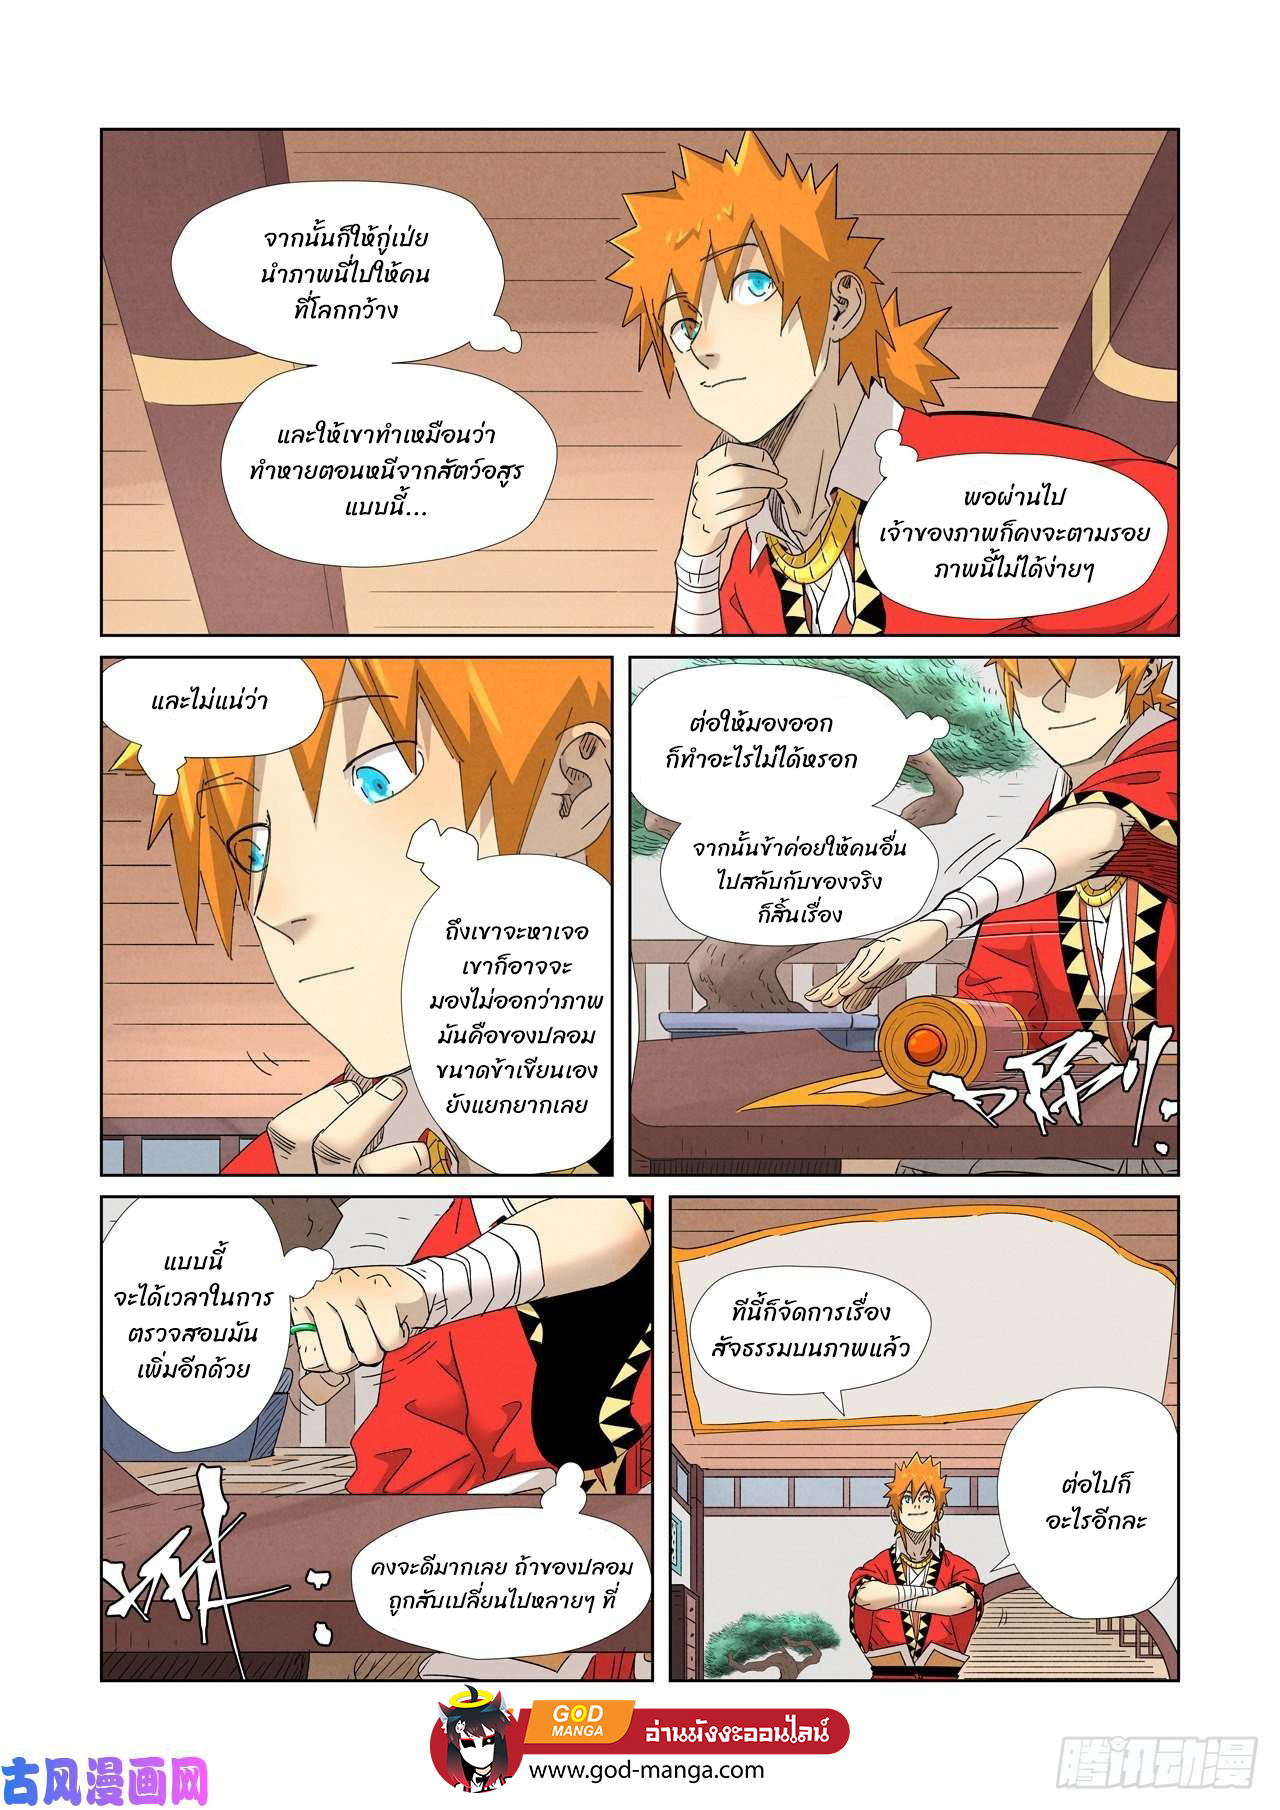 tales of demon of god346 (8)